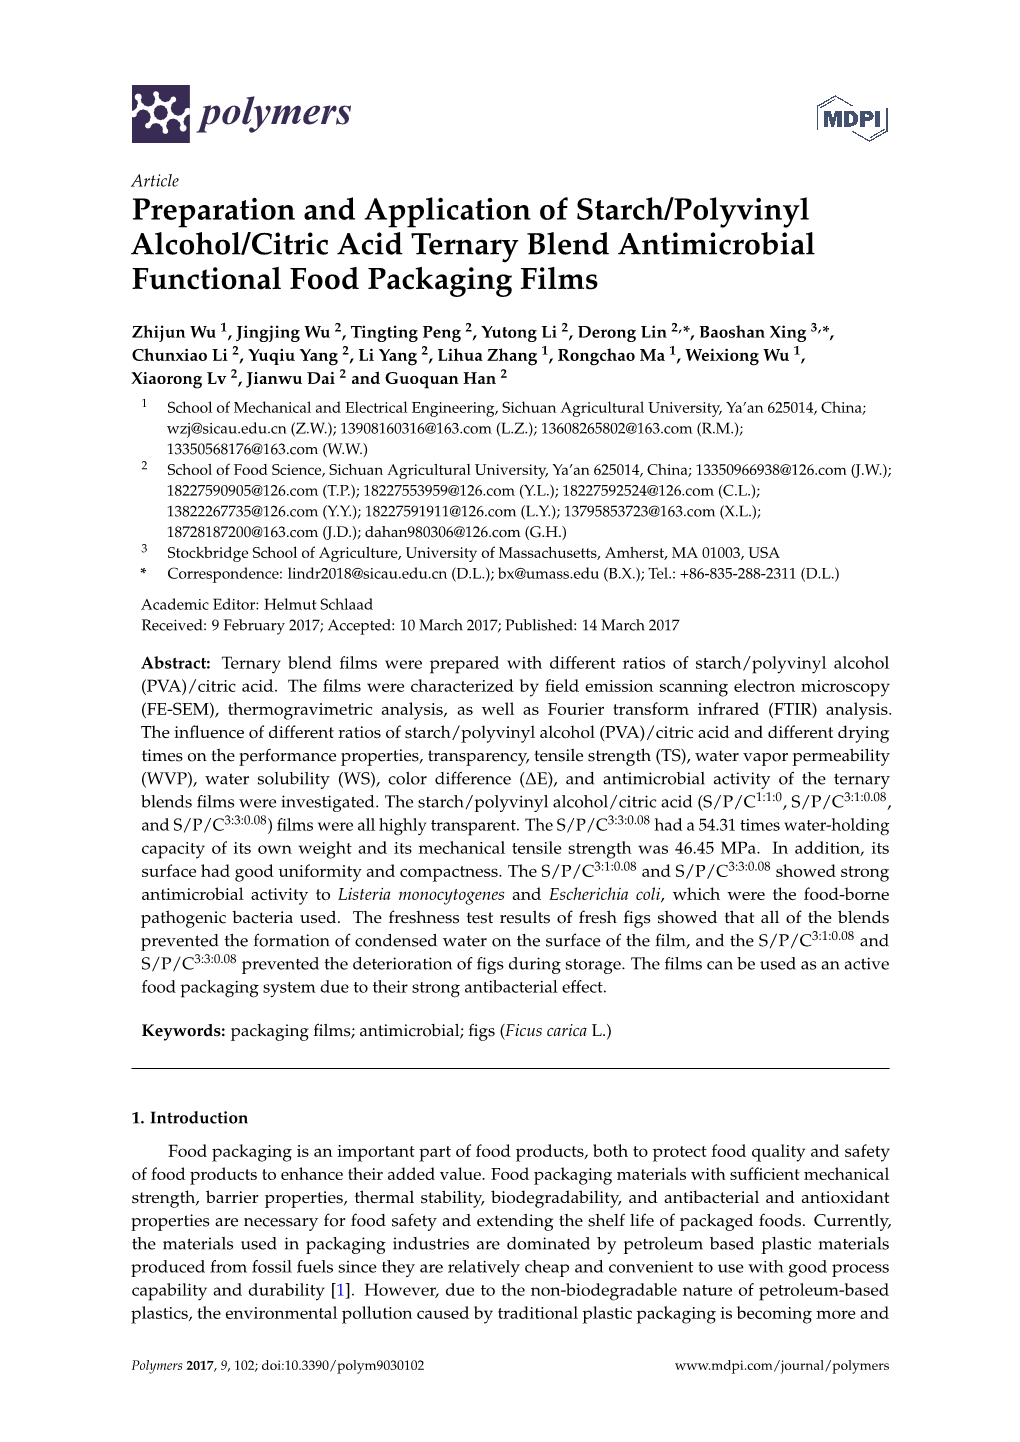 Preparation and Application of Starch/Polyvinyl Alcohol/Citric Acid Ternary Blend Antimicrobial Functional Food Packaging Films